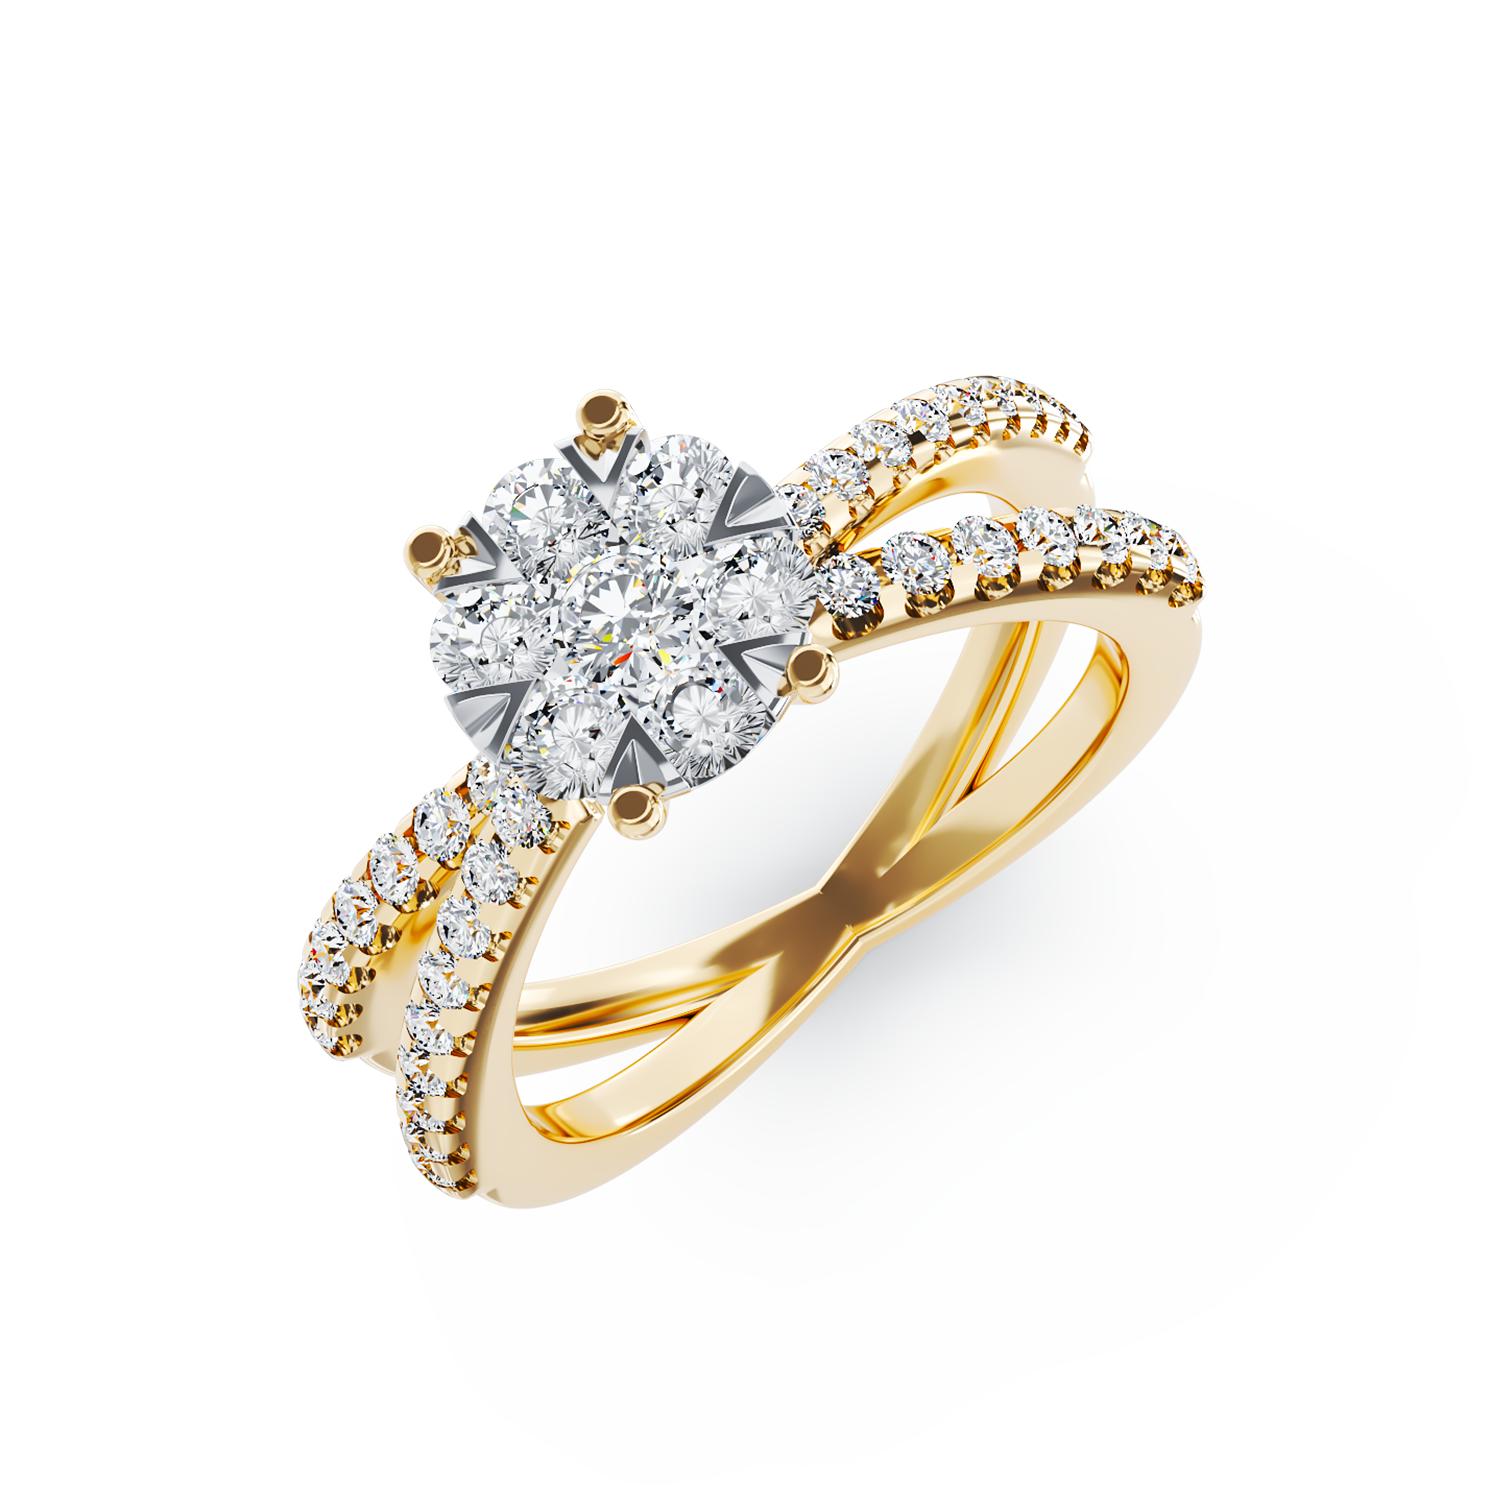 18K yellow gold engagement ring with 0.6ct diamonds